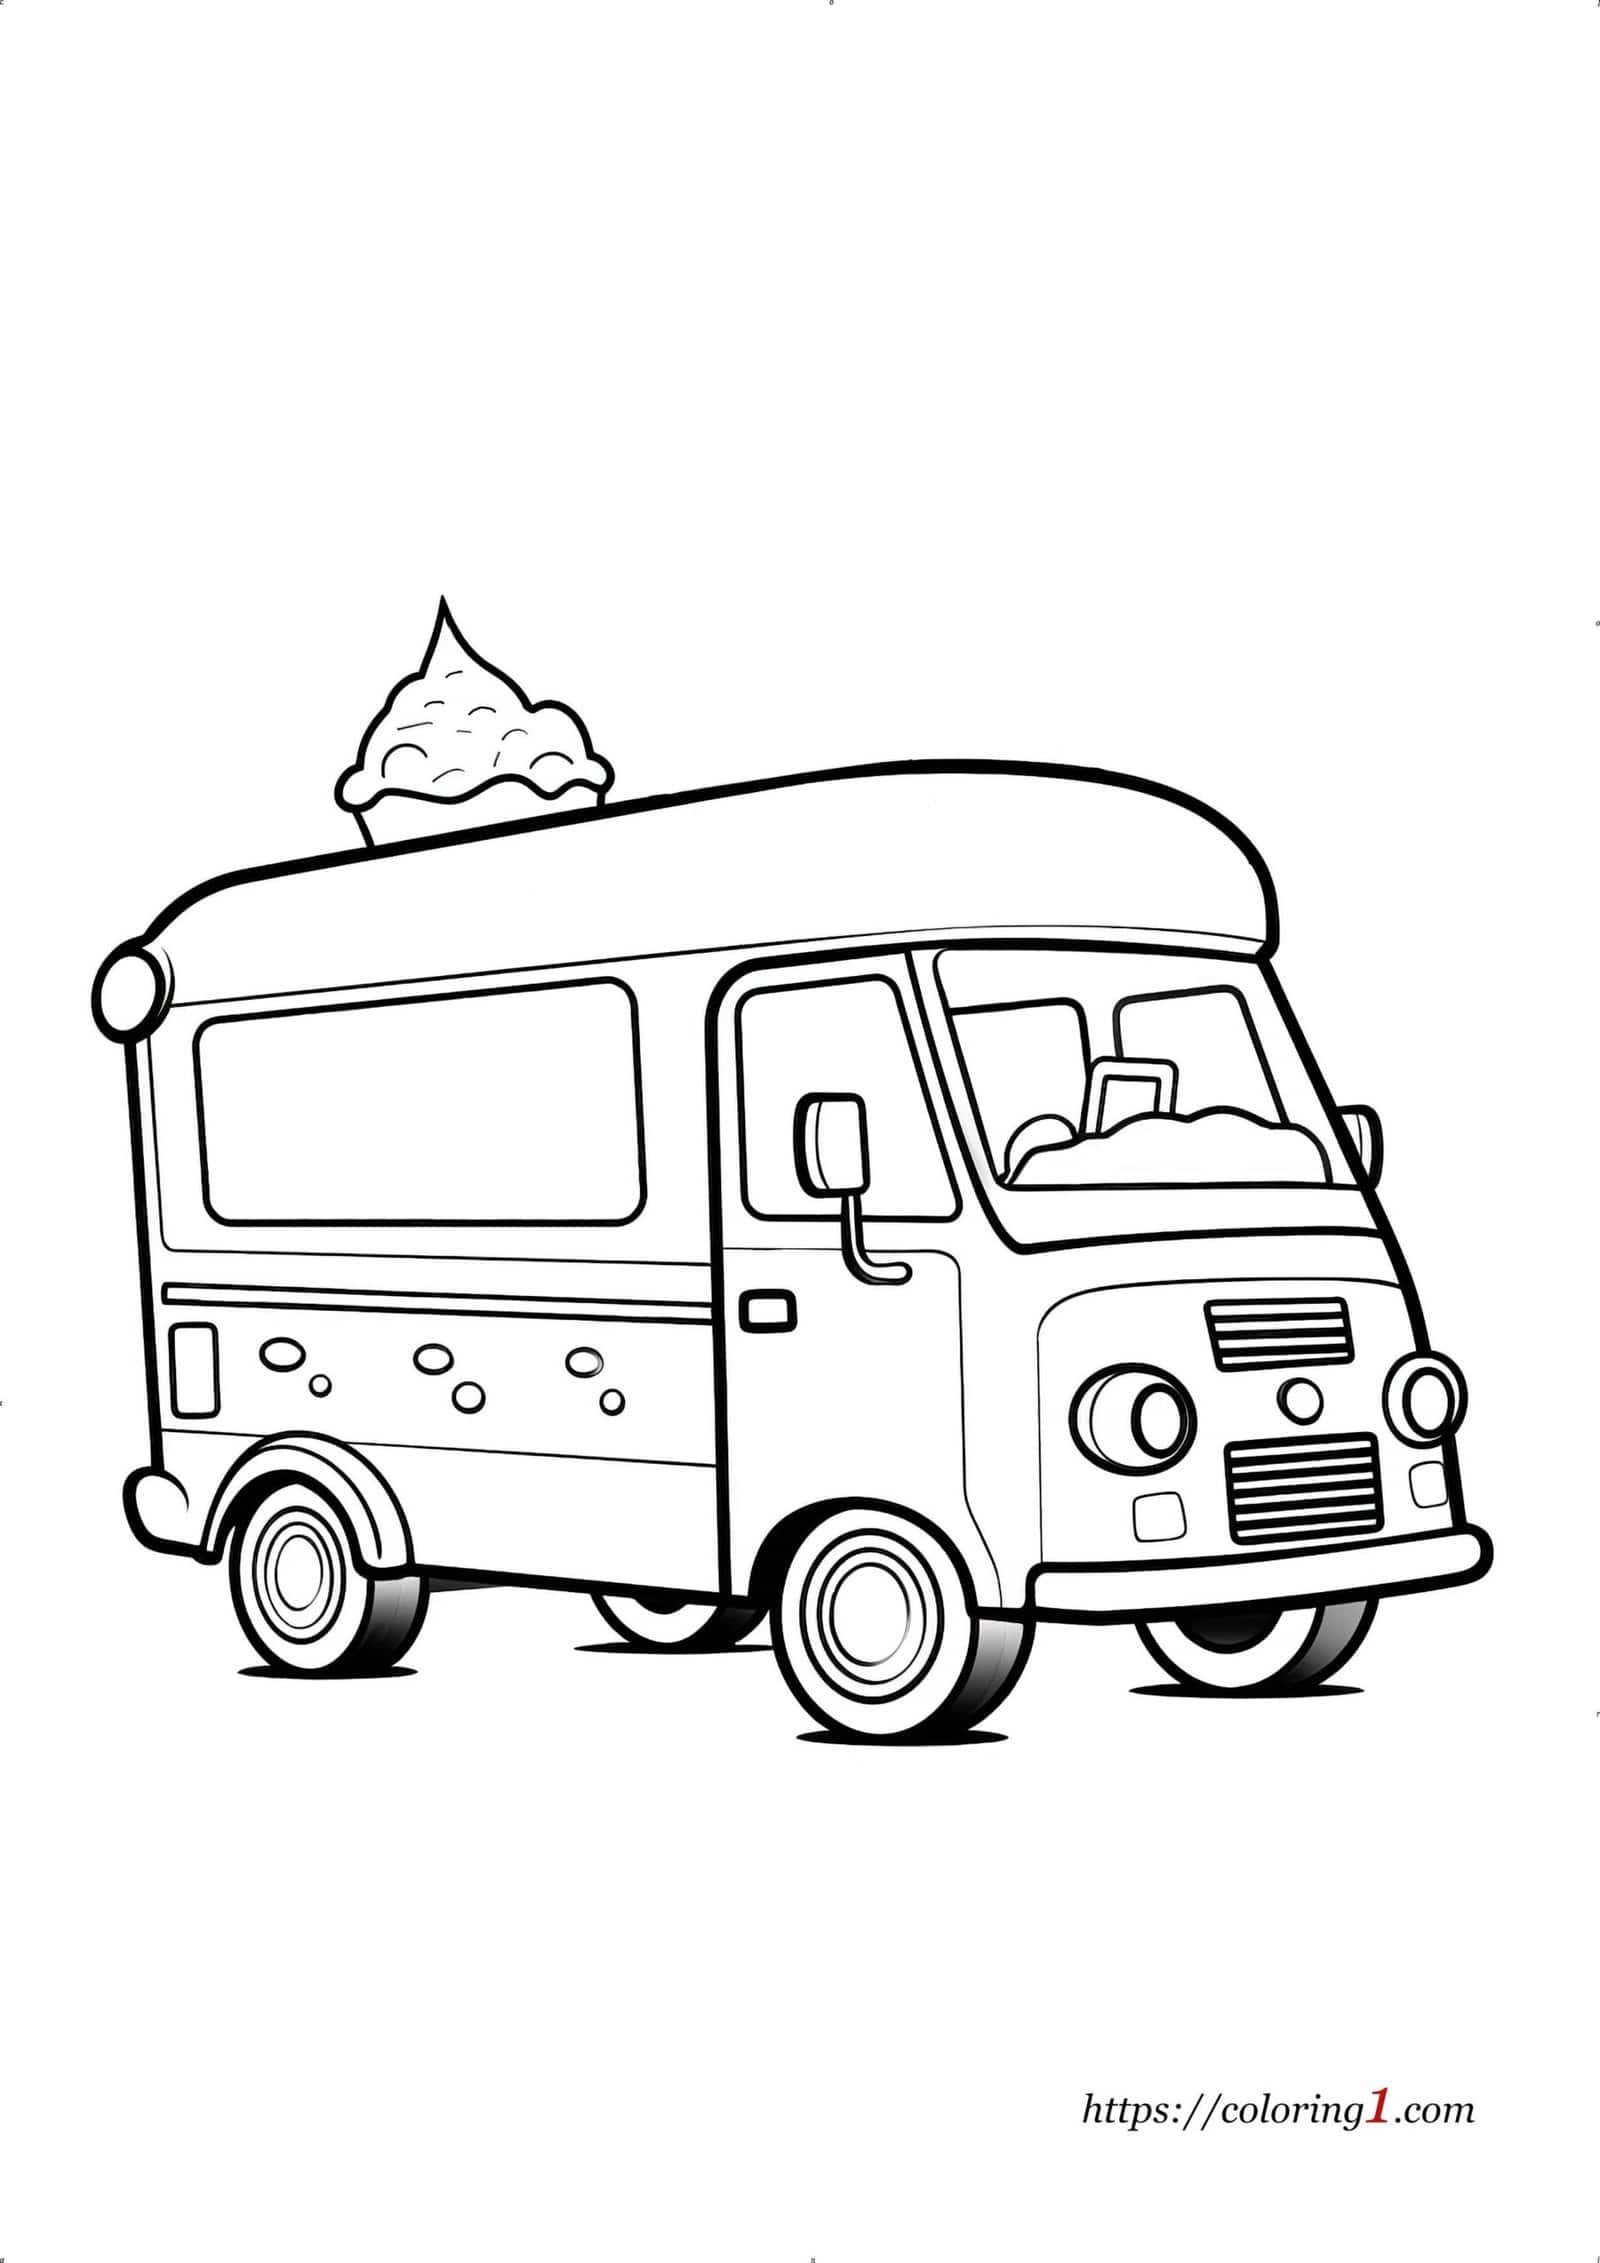 Ice Cream Bus coloring sheet for kids